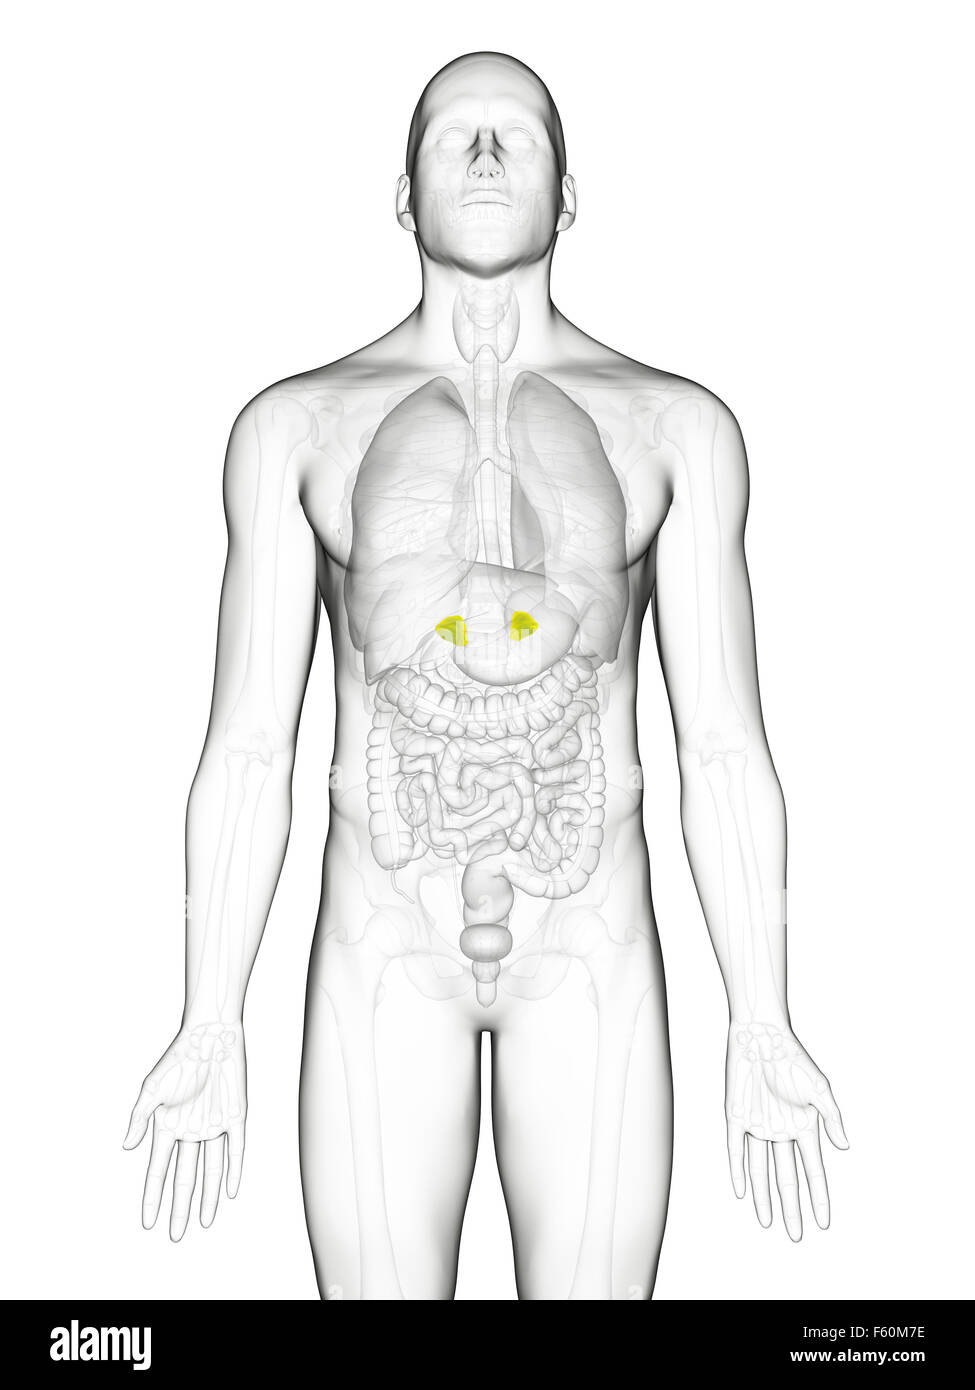 medically accurate illustration of the adrenal glands Stock Photo